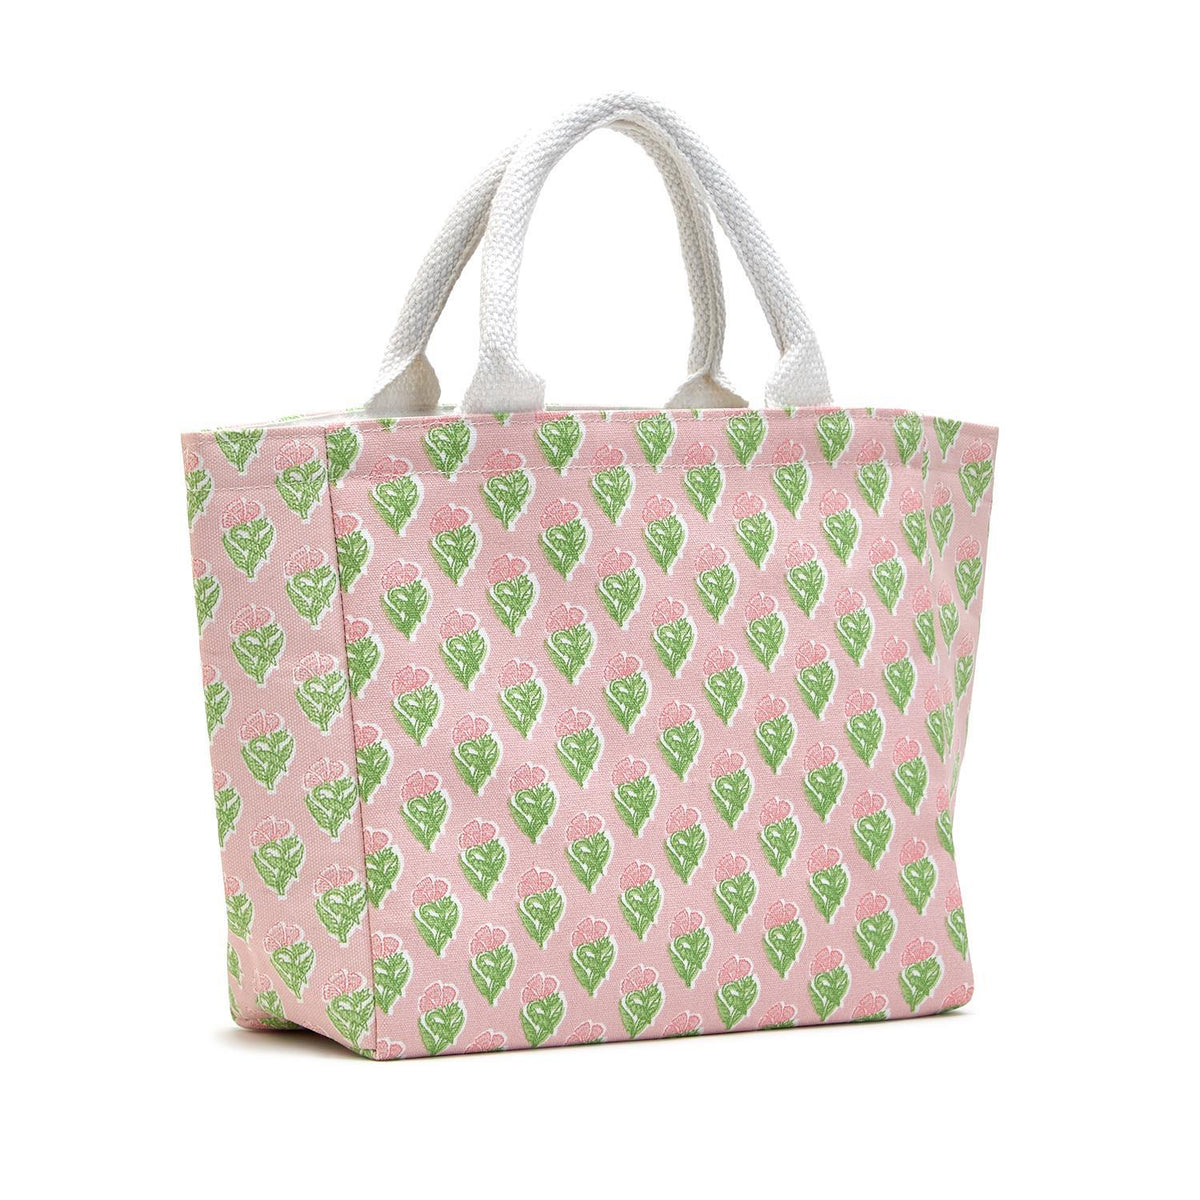 Floral Block Print Thermal Lunch Tote Bag in Assorted 3 Patterns - Cotton Canvas - The Preppy Bunny